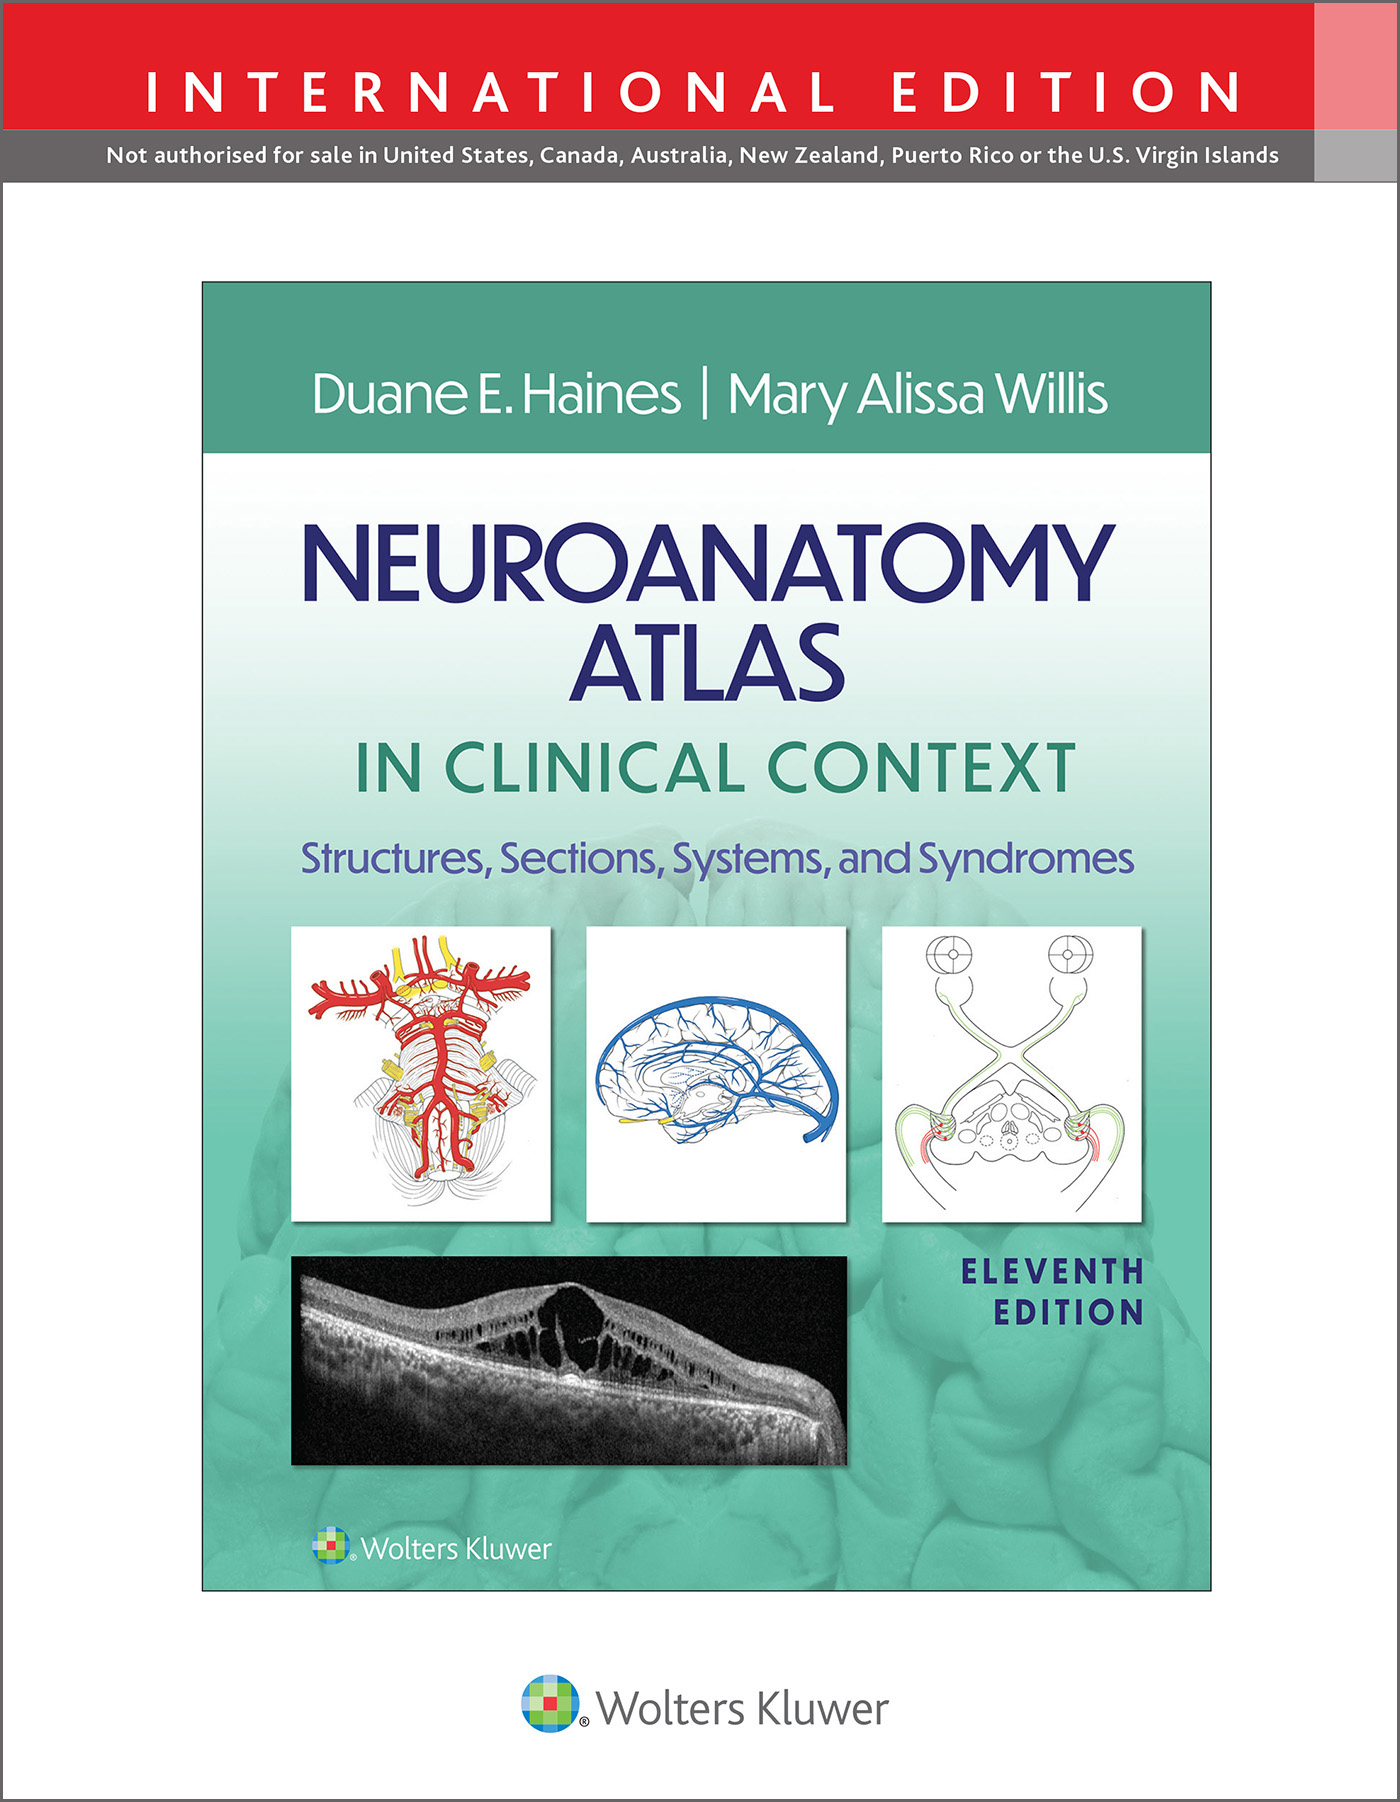 Neuroanatomy Atlas in Clinical Context, 11th ed.(Int'l ed.)- Structures, Sections, Systems & Syndromes